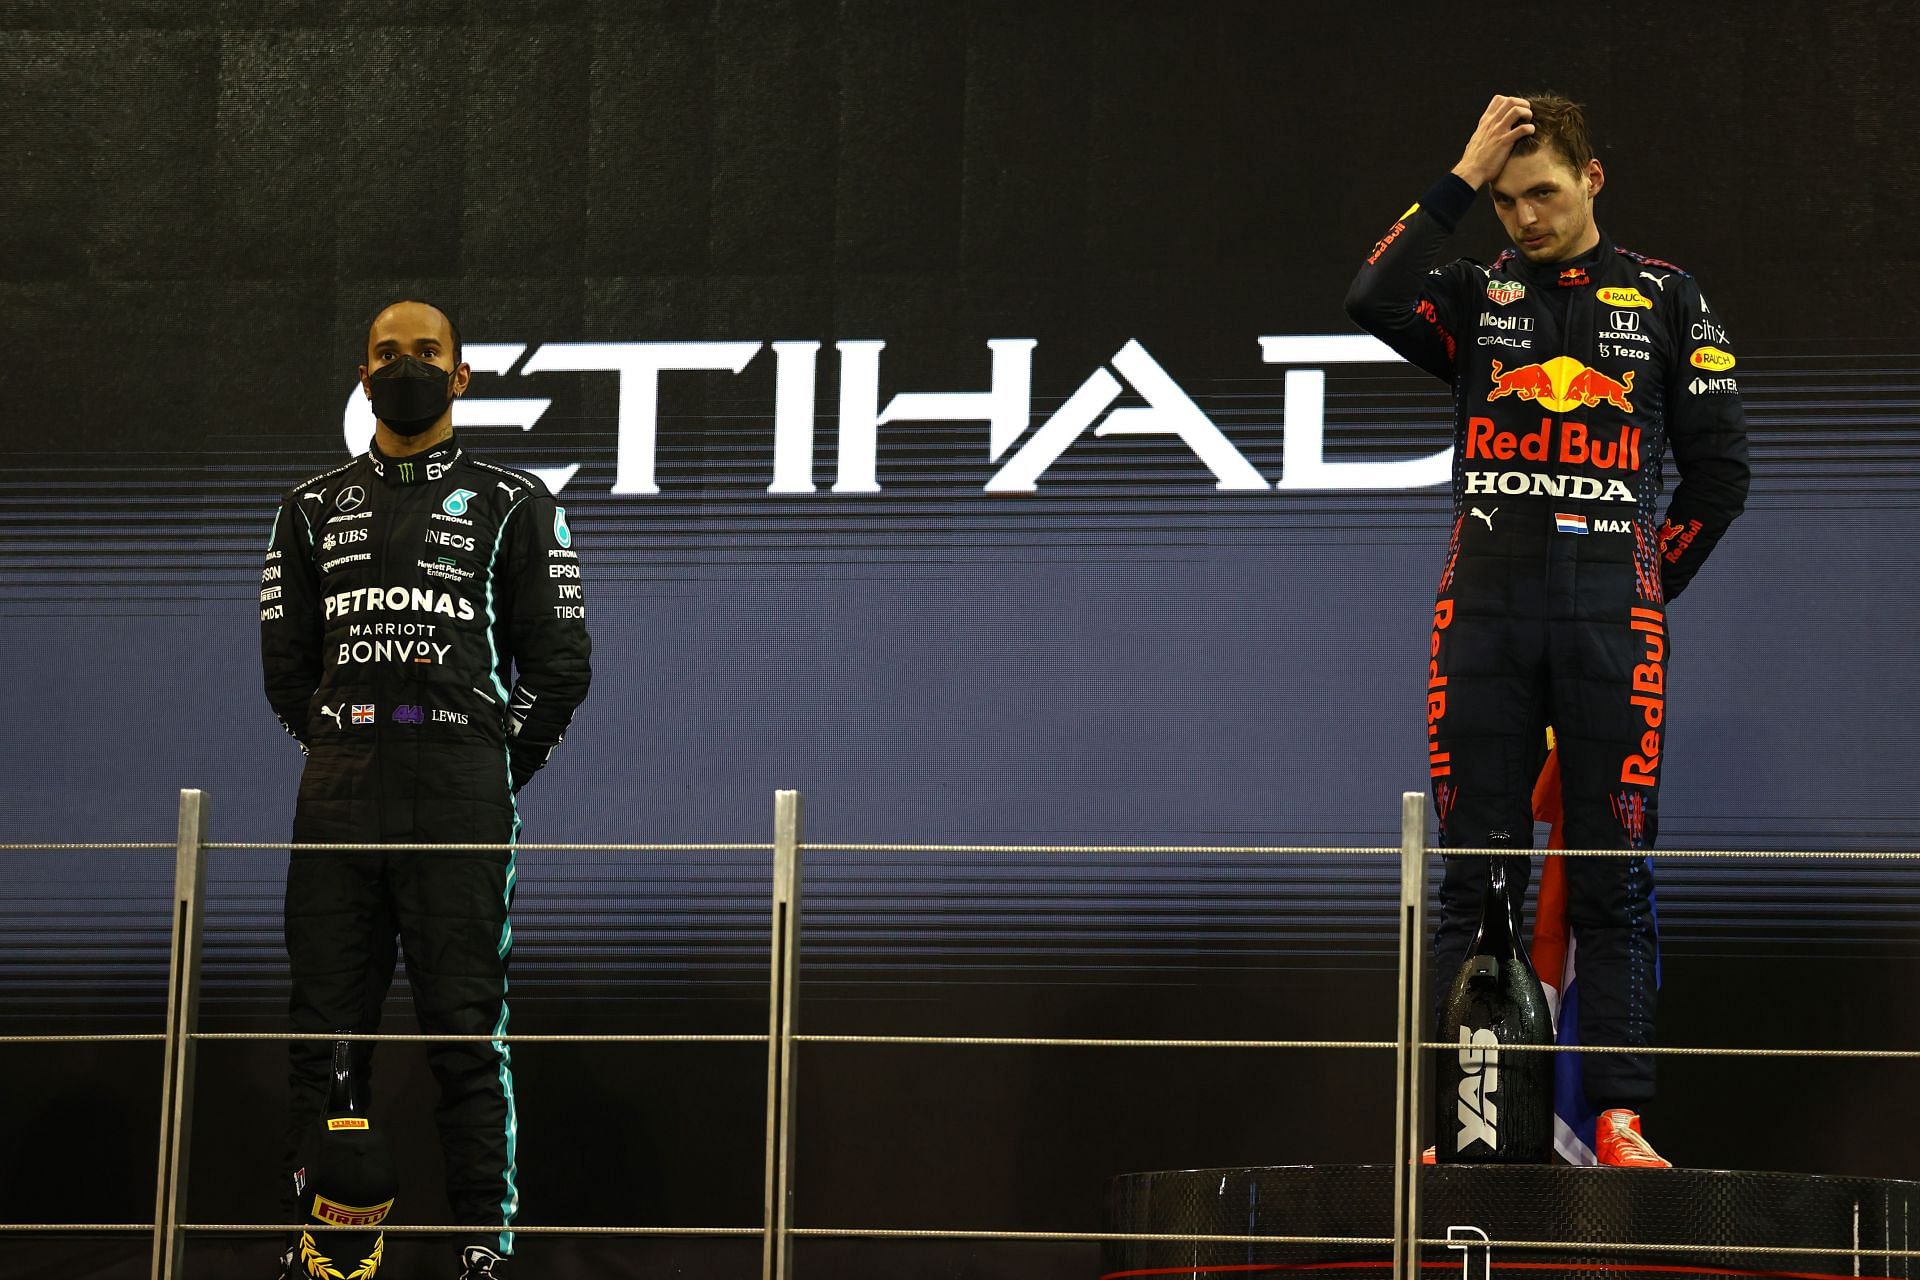 Lewis Hamilton (left) and Max Verstappen (right) on the podium at the 2021 Abu Dhabi Grand Prix (Photo by Bryn Lennon/Getty Images)